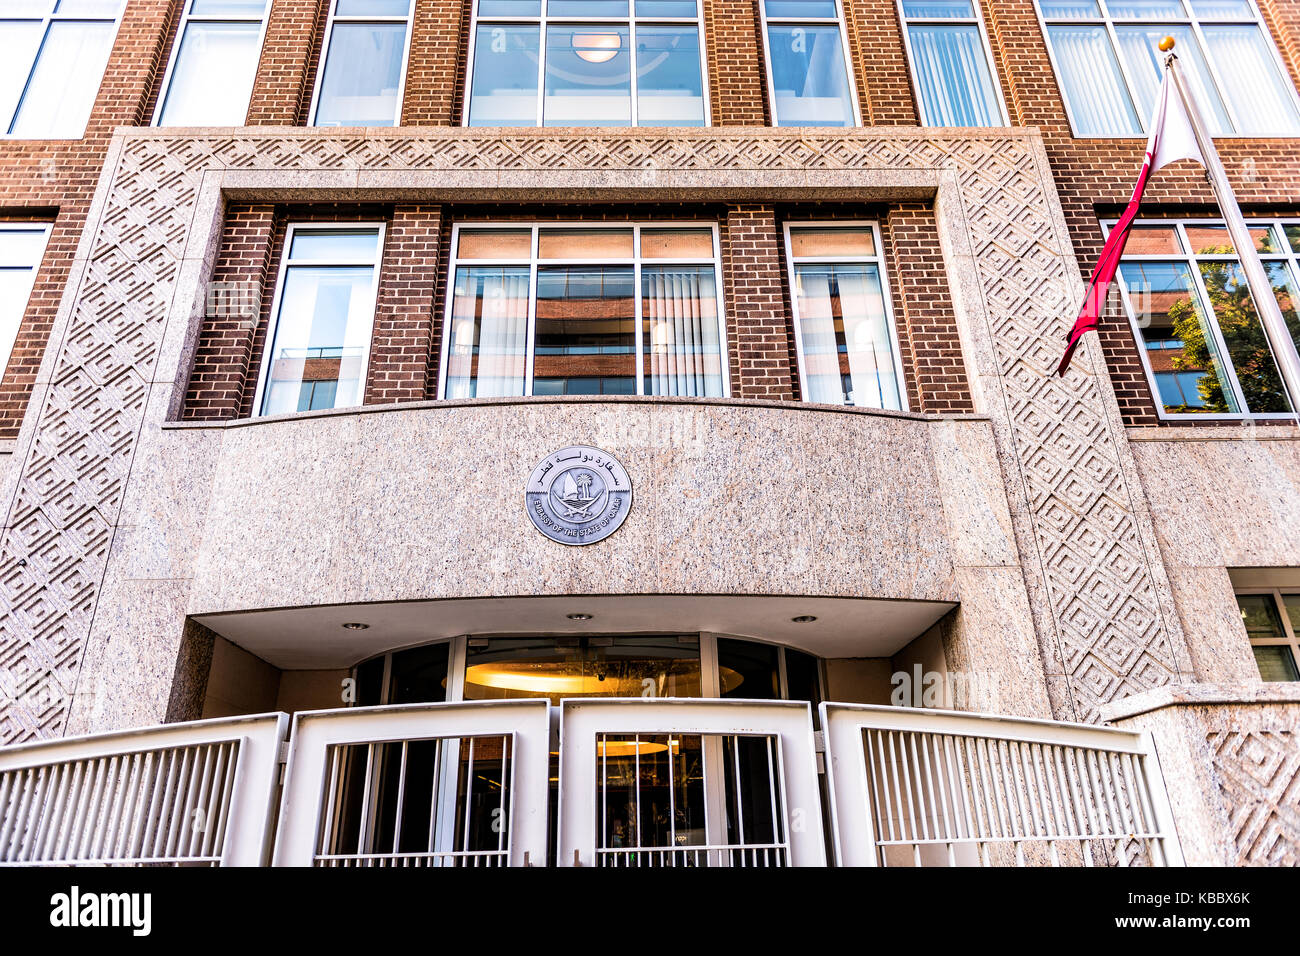 Washington DC, USA - August 4, 2017: Embassy of the State of Qatar closeup sign of building entrance Stock Photo